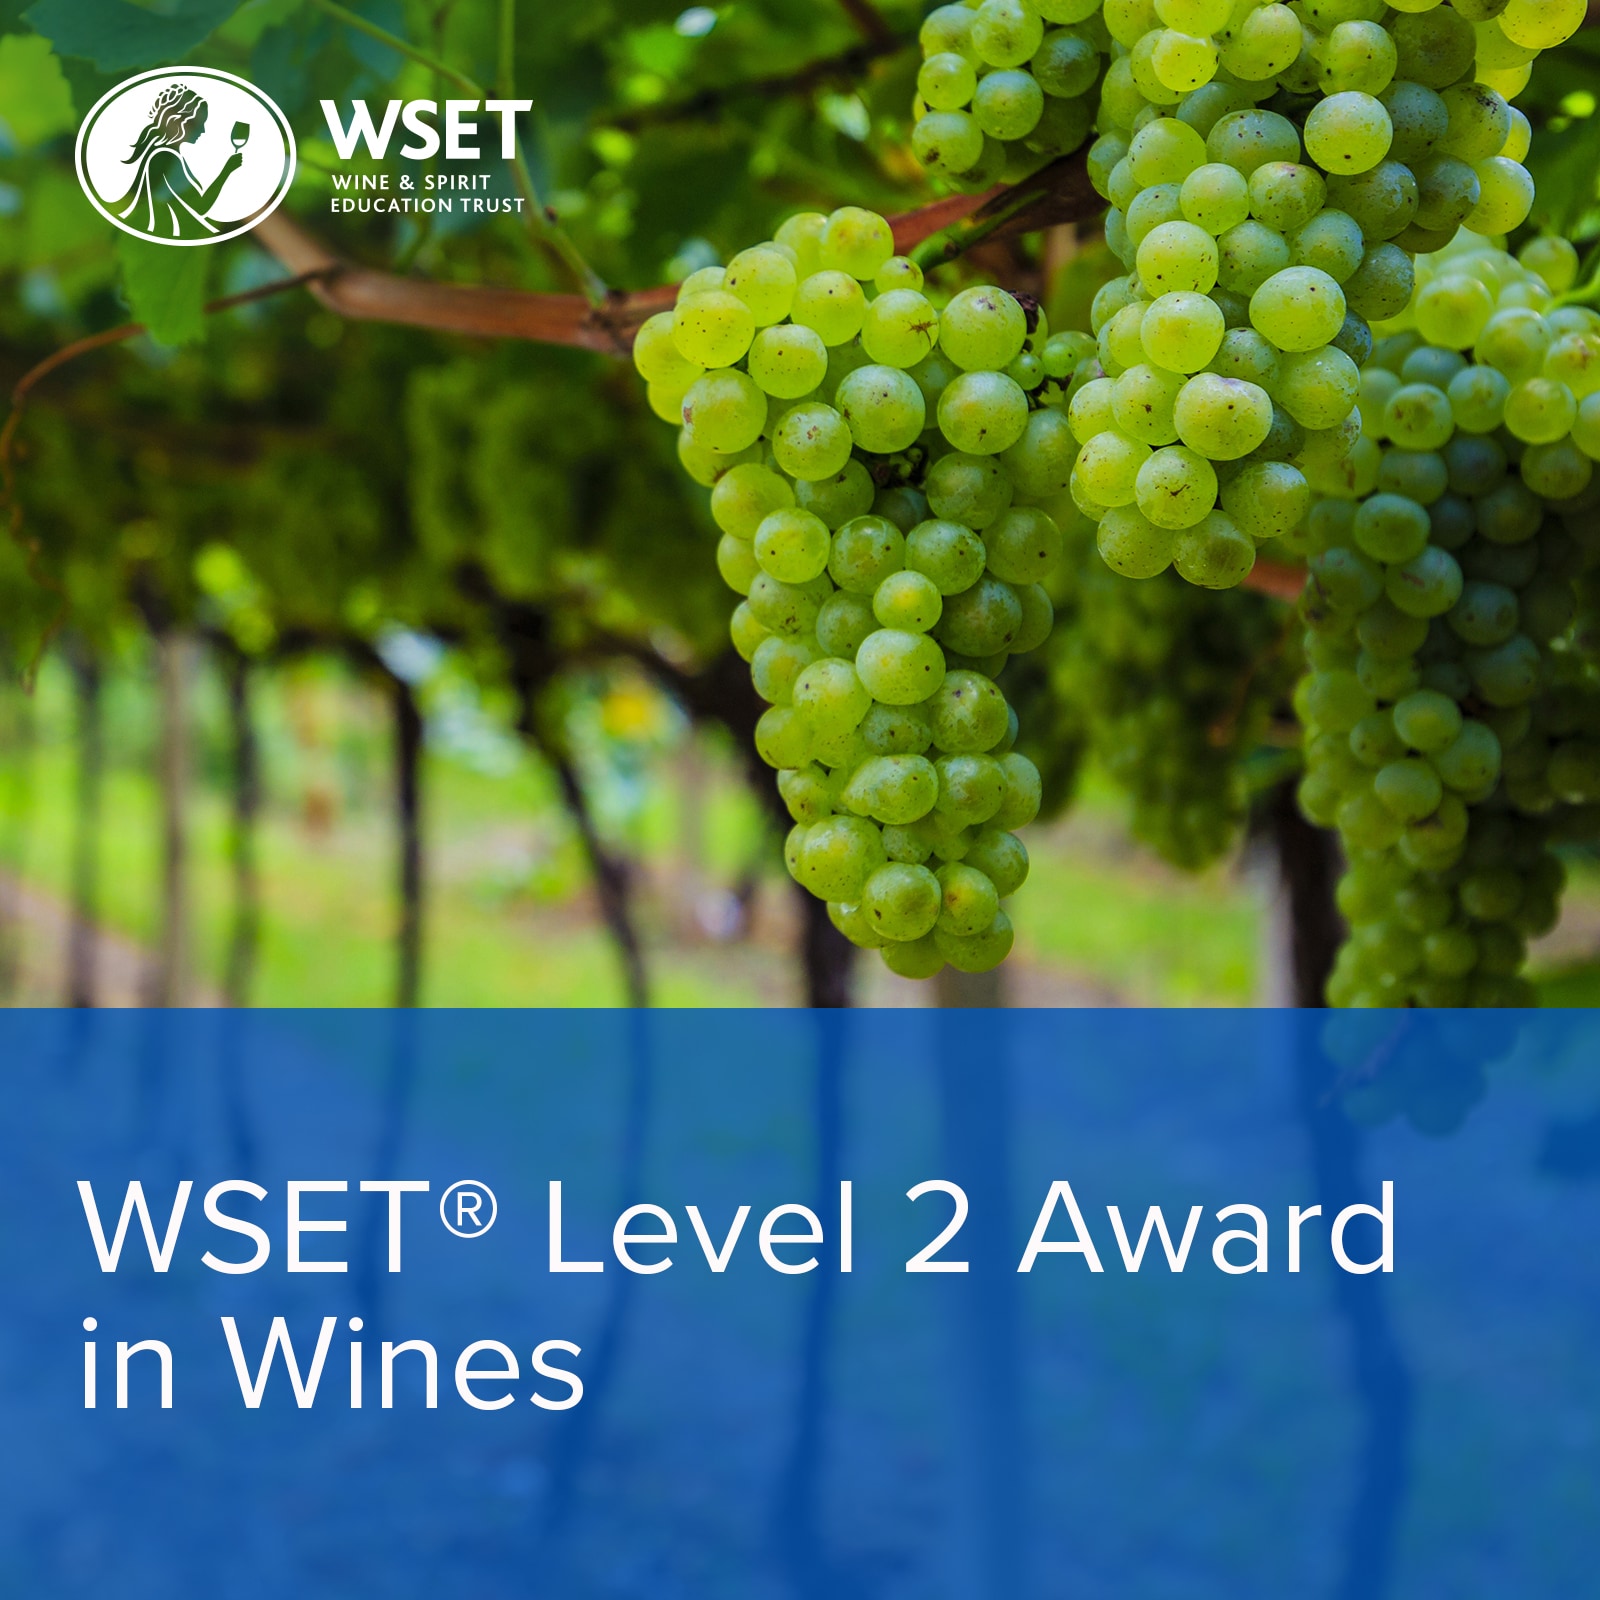 WSET Level 2 in Wines at Averys, Tues 5th Sept 2023 